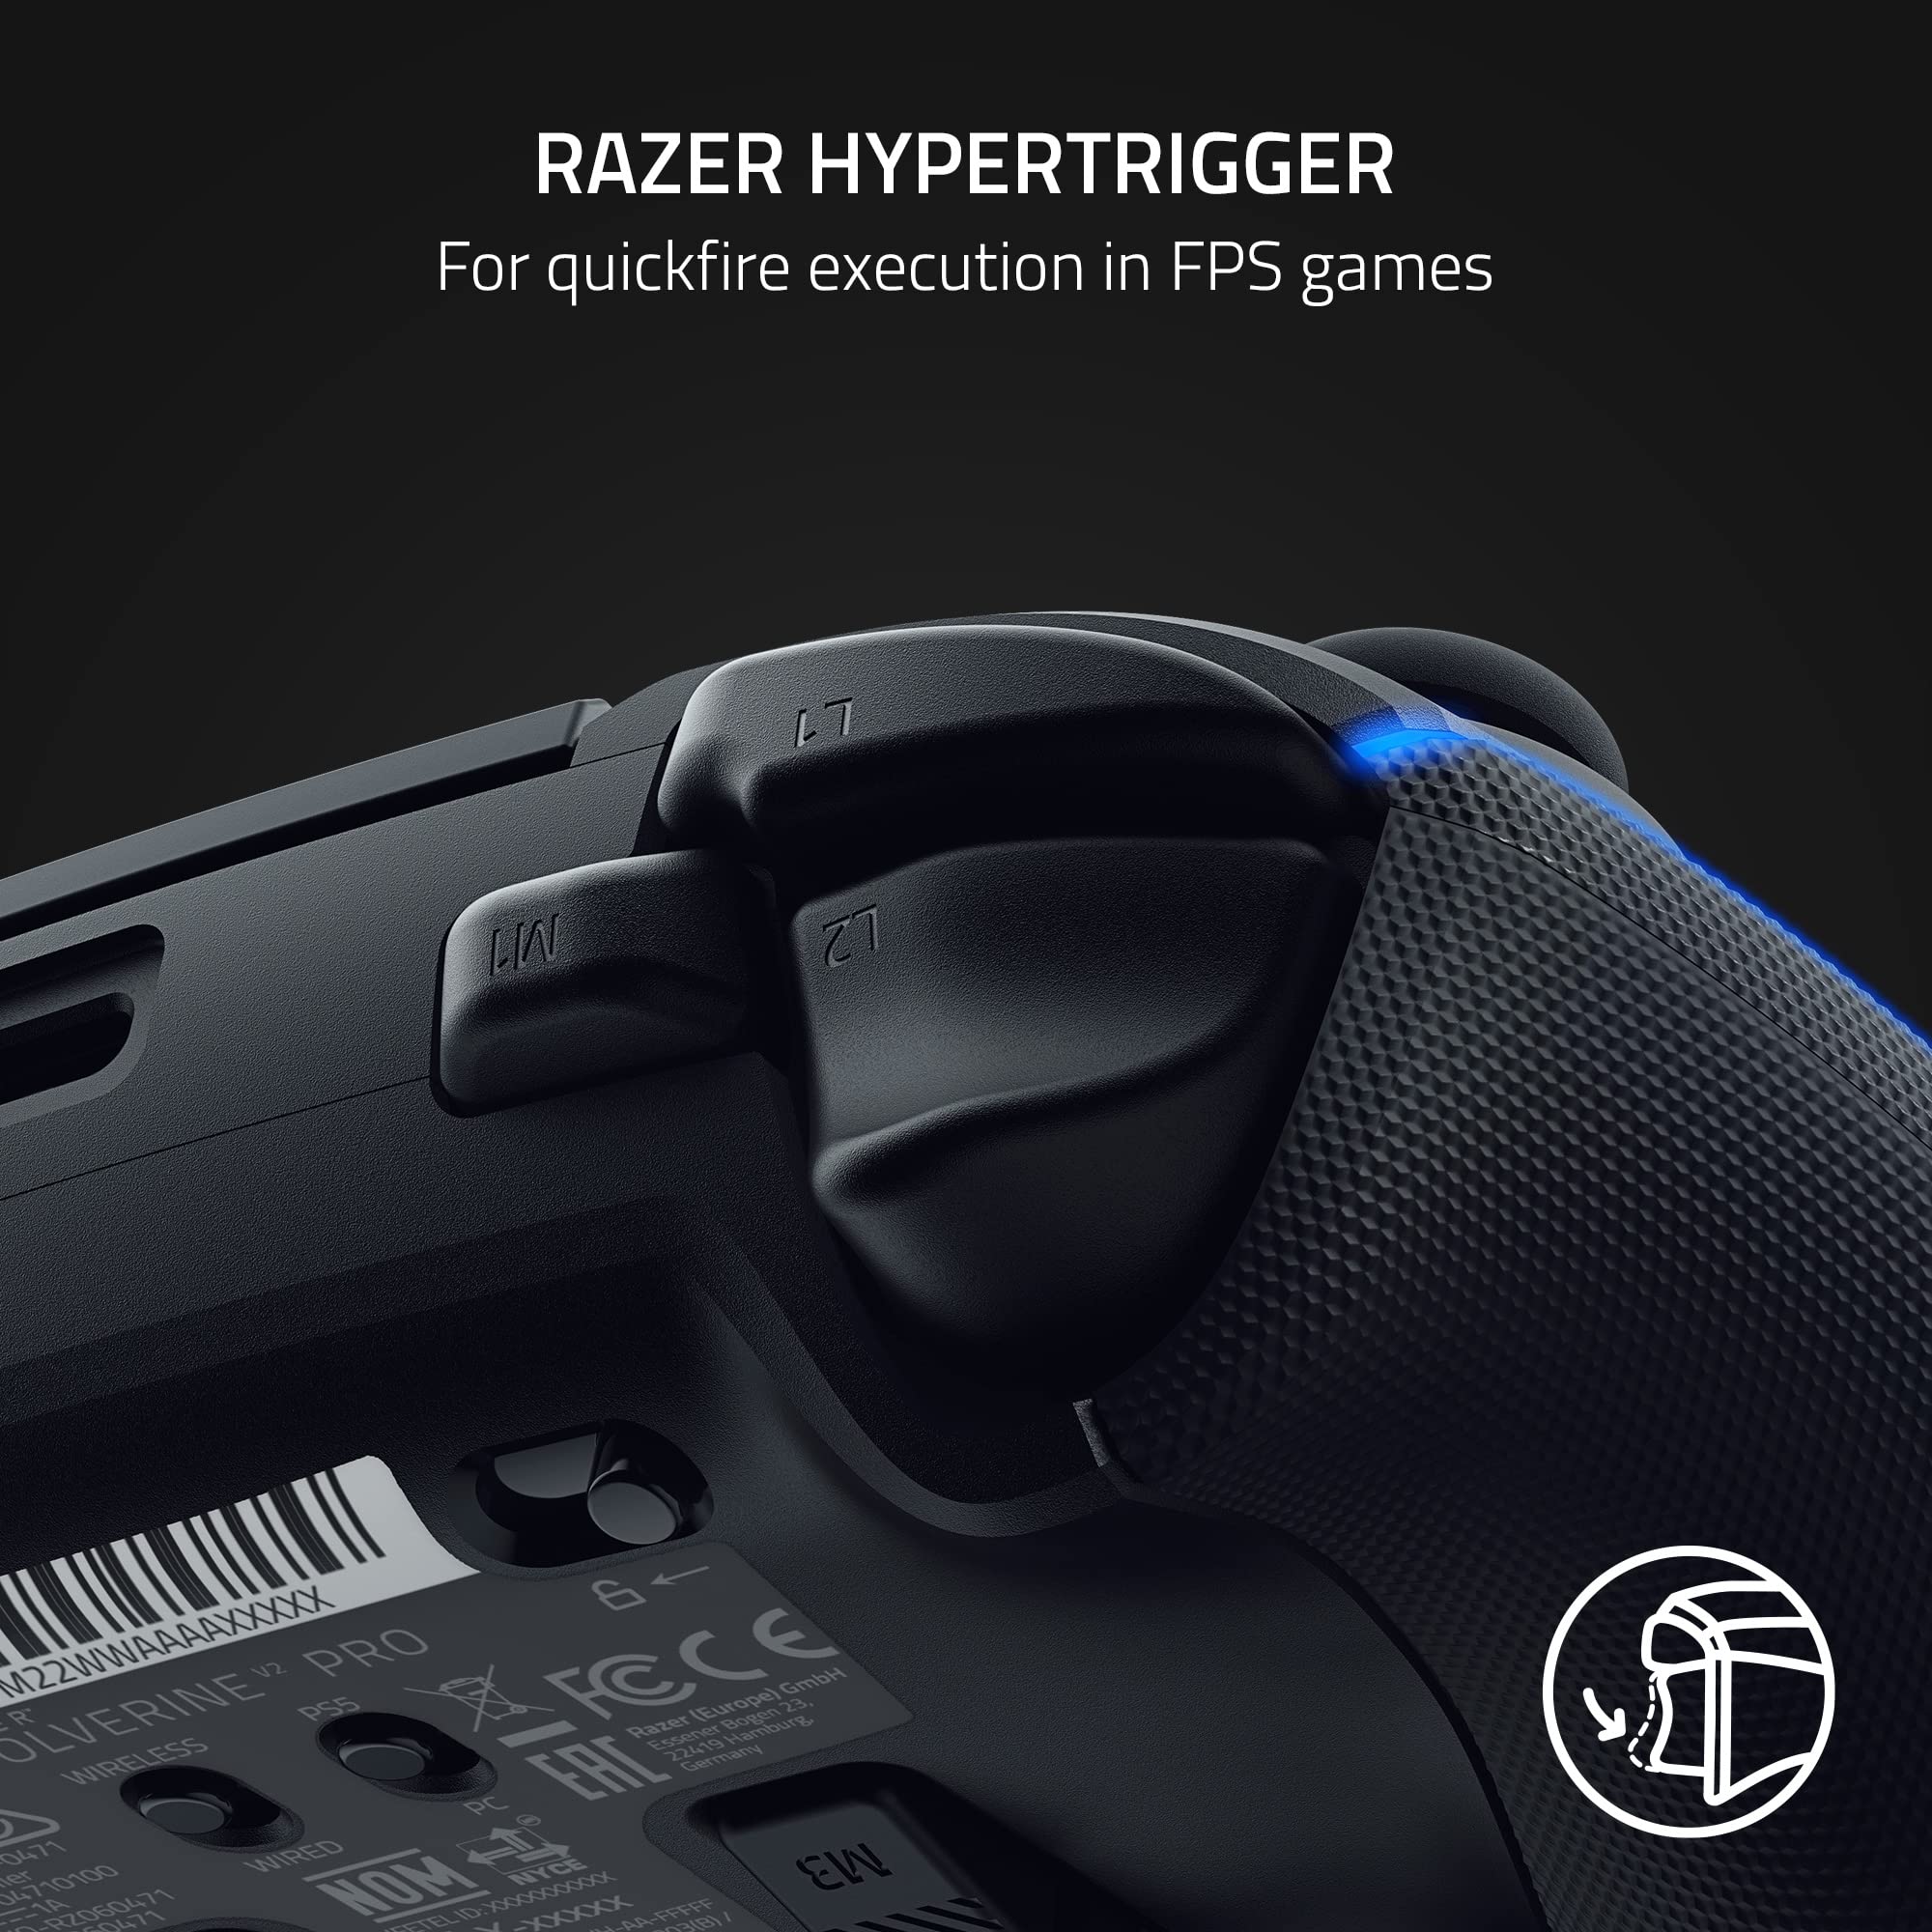 Razer Wolverine V2 Pro Wireless Gaming Controller for PlayStation 5 / PS5, PC: Mecha-Tactile Action Buttons - 8-Way Microswitch D-Pad - HyperTrigger - 6 Remappable Buttons - Chroma RGB   - Black